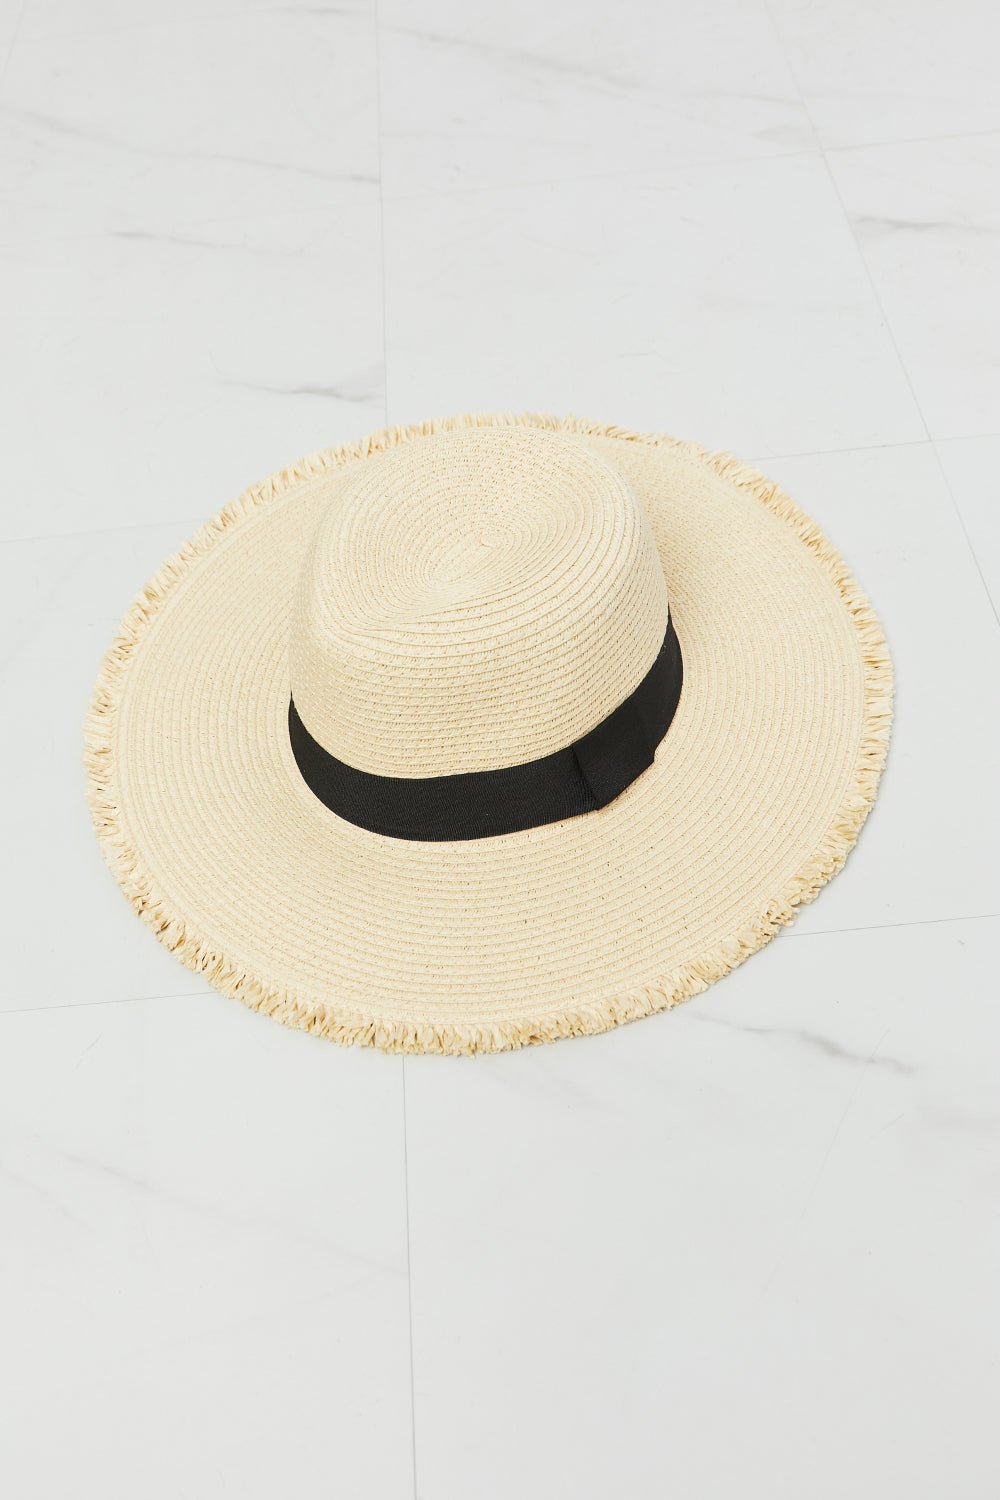 Fame Time For The Sun Straw Hat - Shah S. Sahota